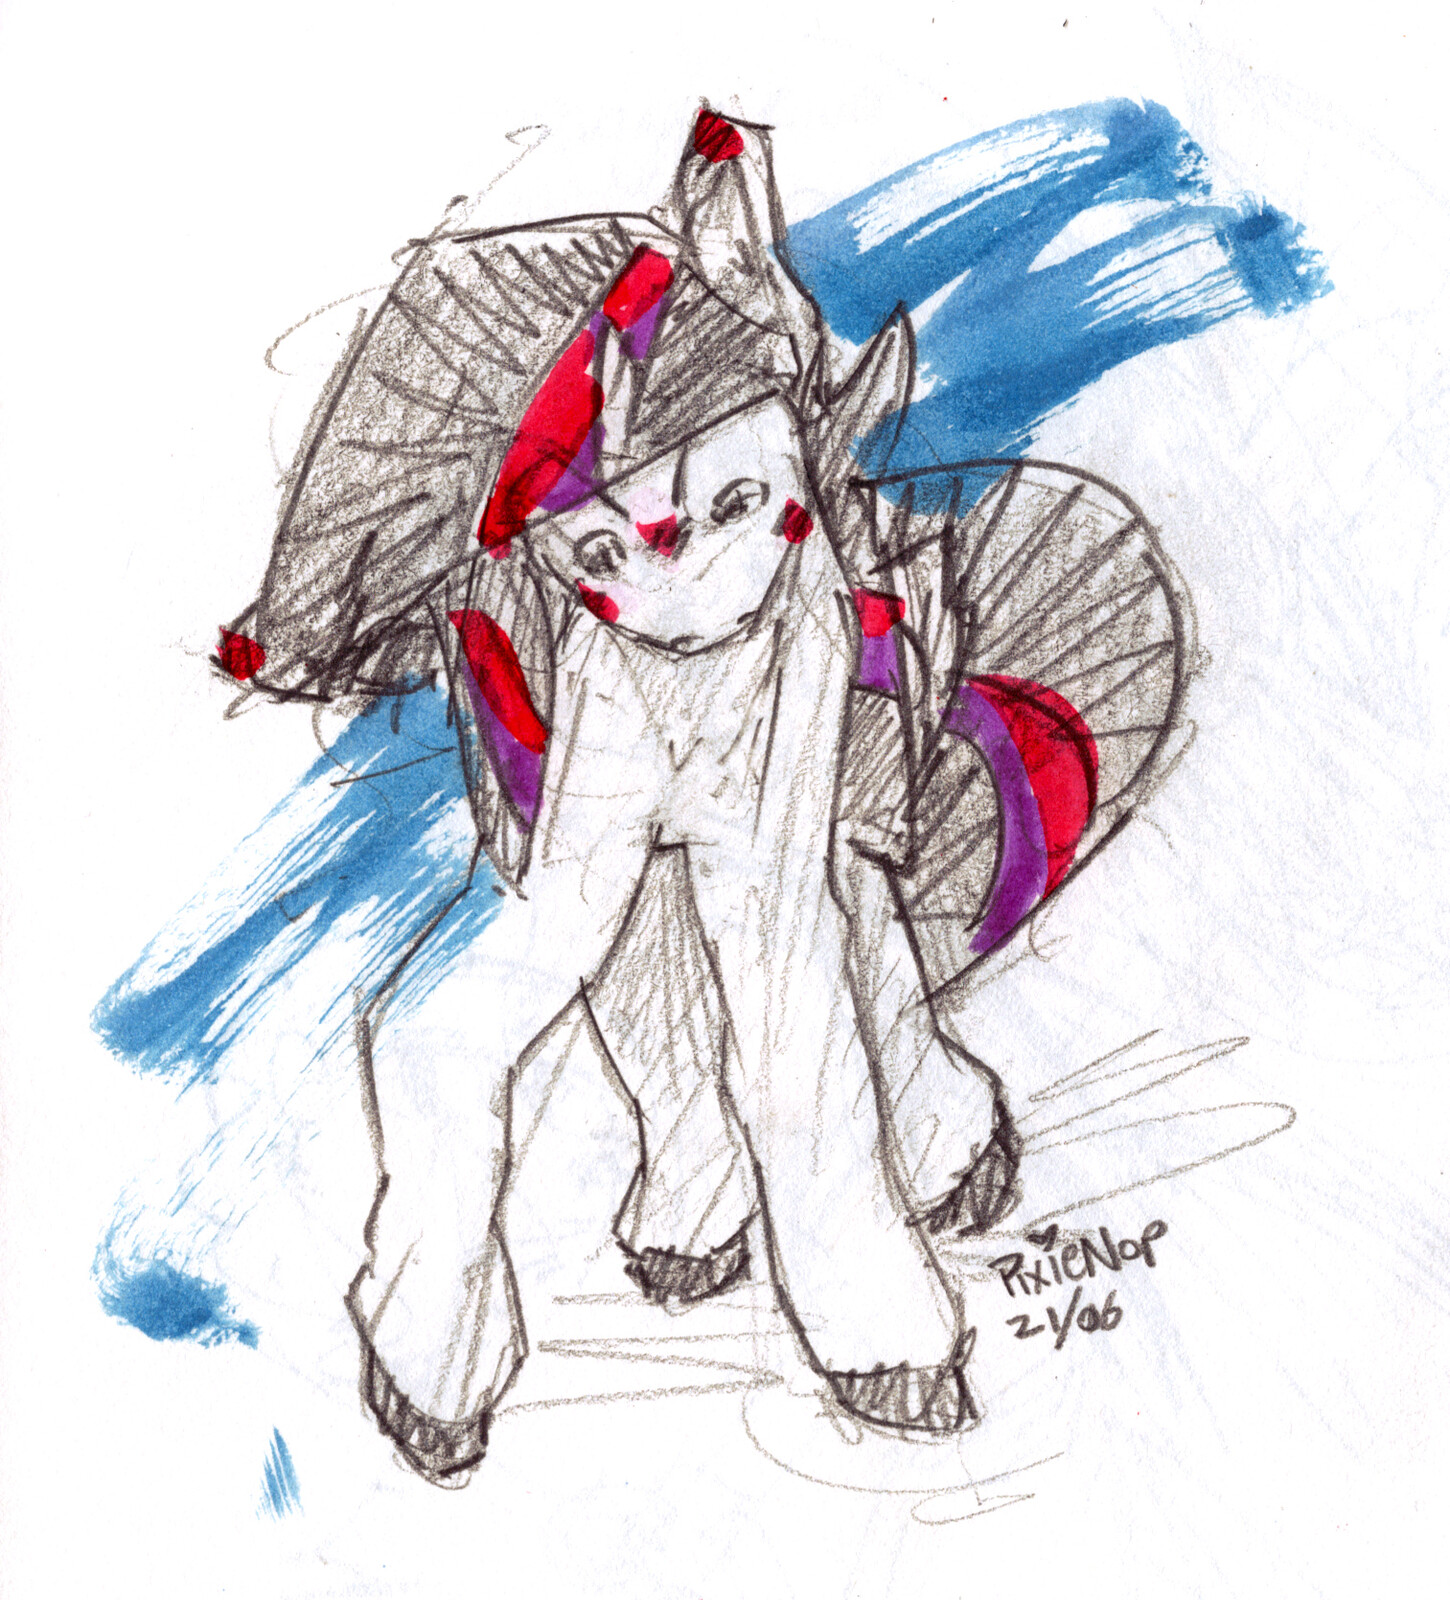 Sketch of Twilight, I'm not super happy with the close leg but it was a fun picture.